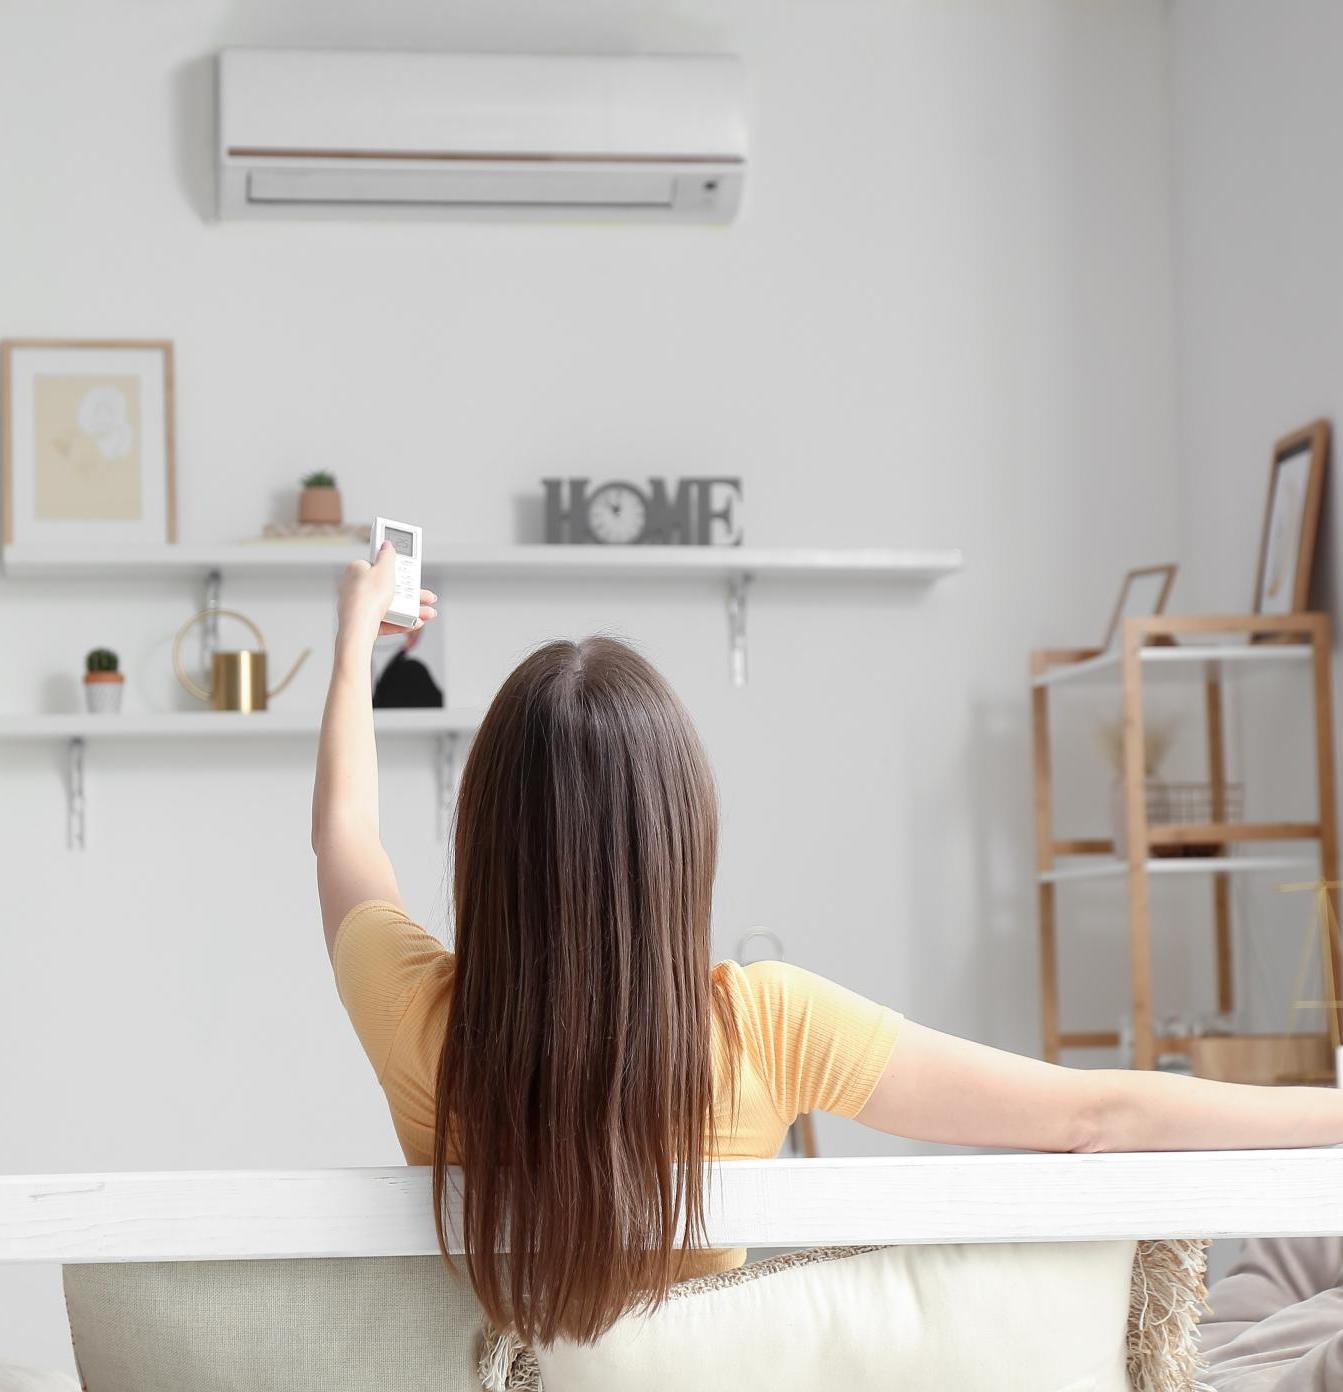 How does a Ductless Air Conditioning System cool a home?